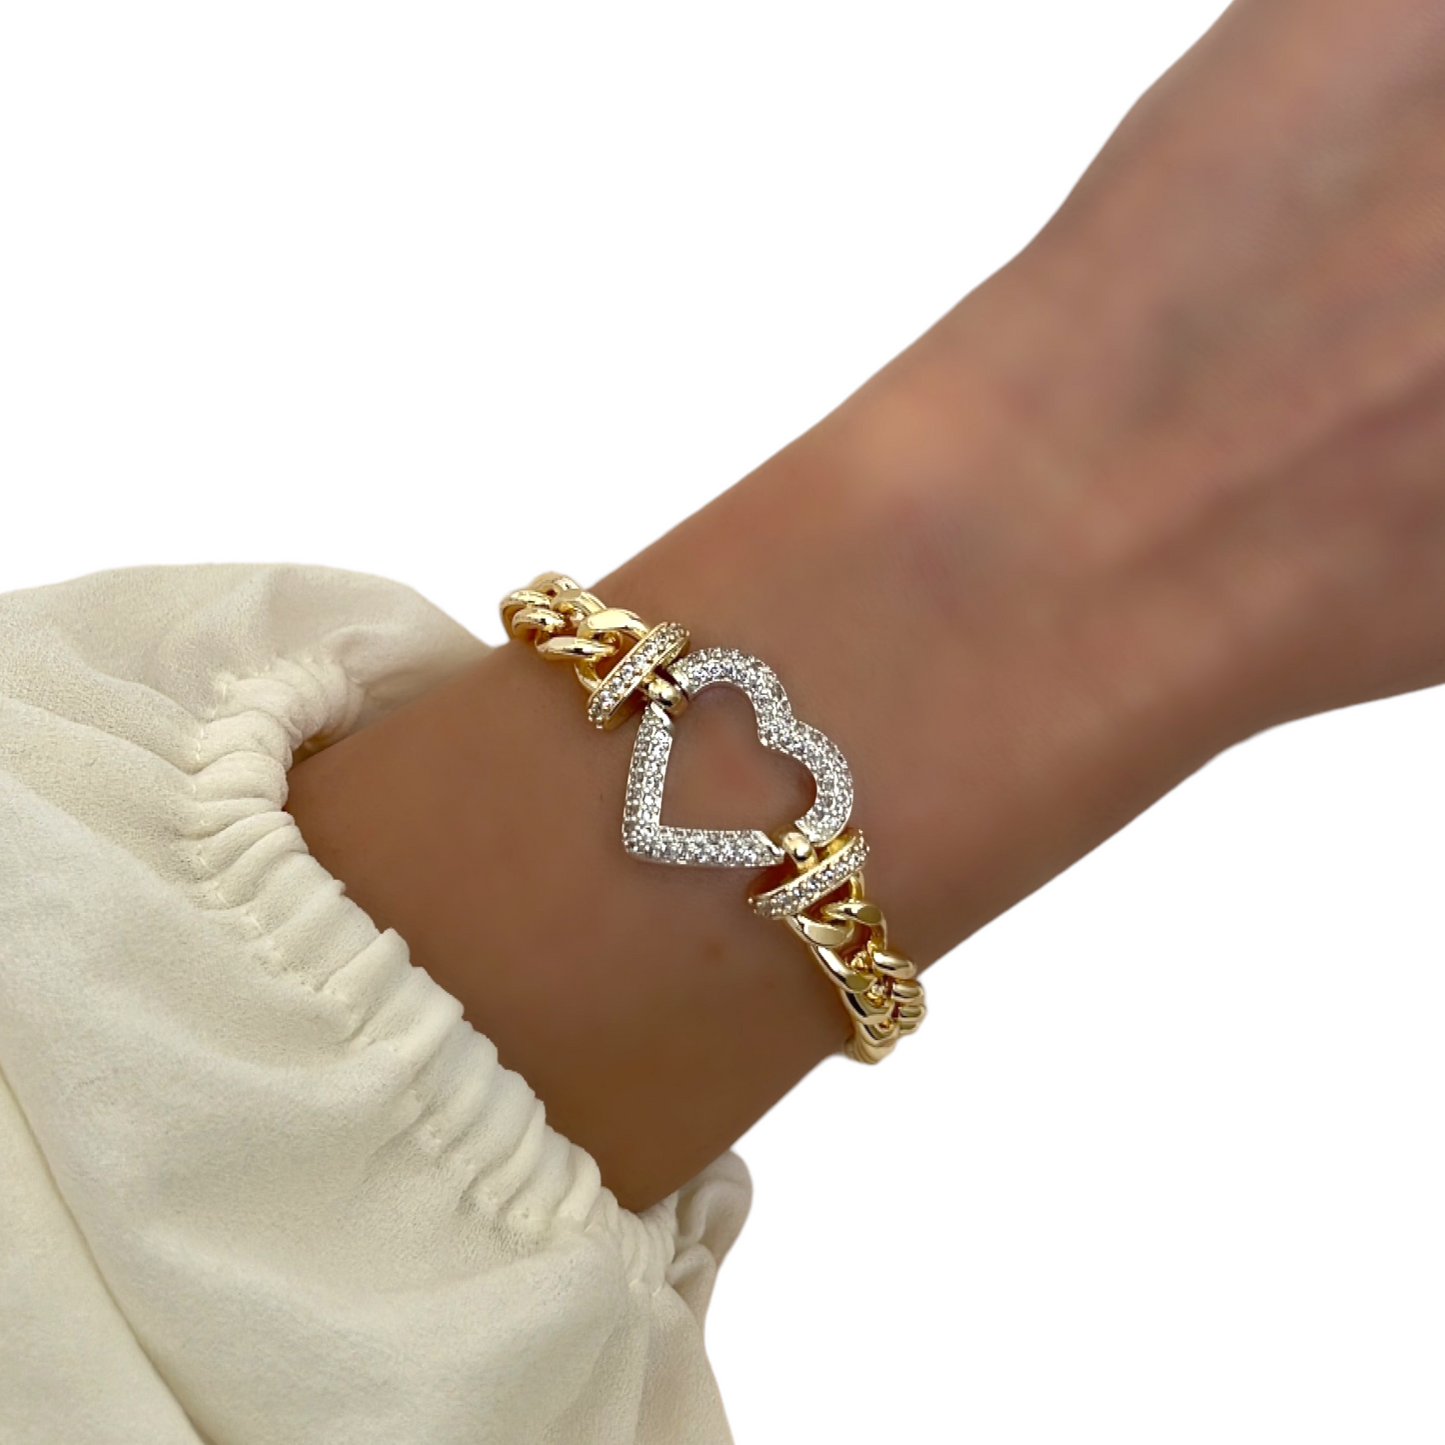 Silver and Gold heart Bracelet